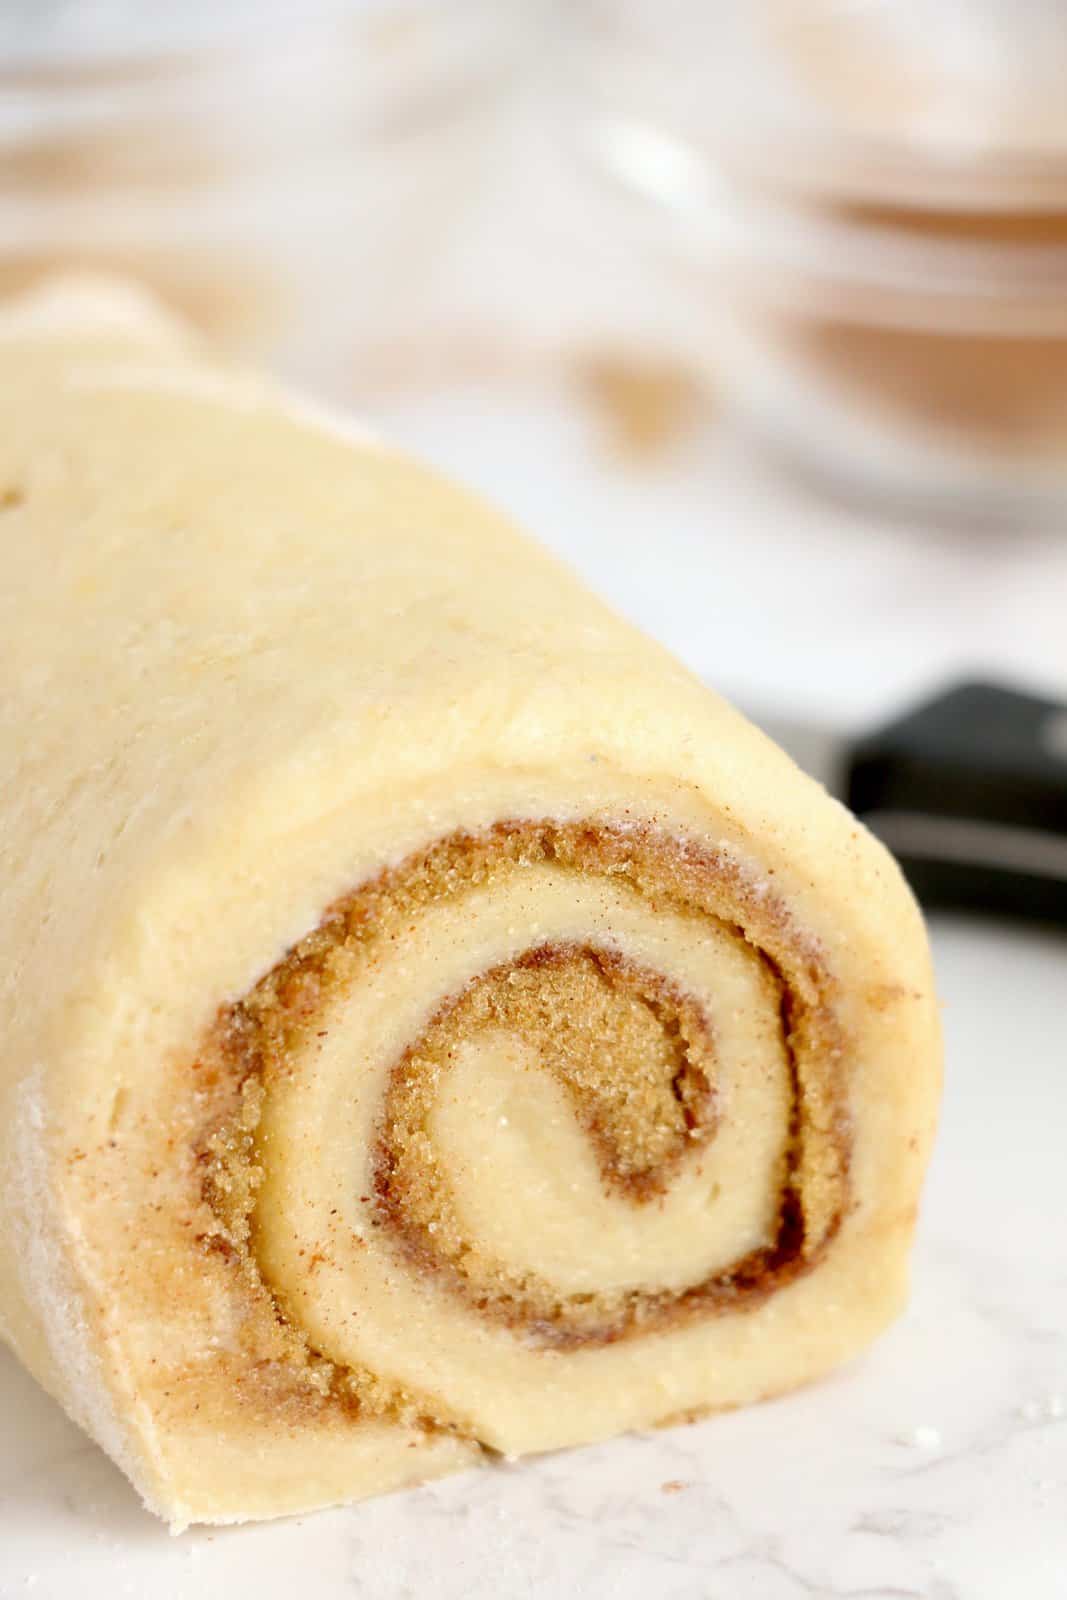 Cinnamon roll dough rolled up.